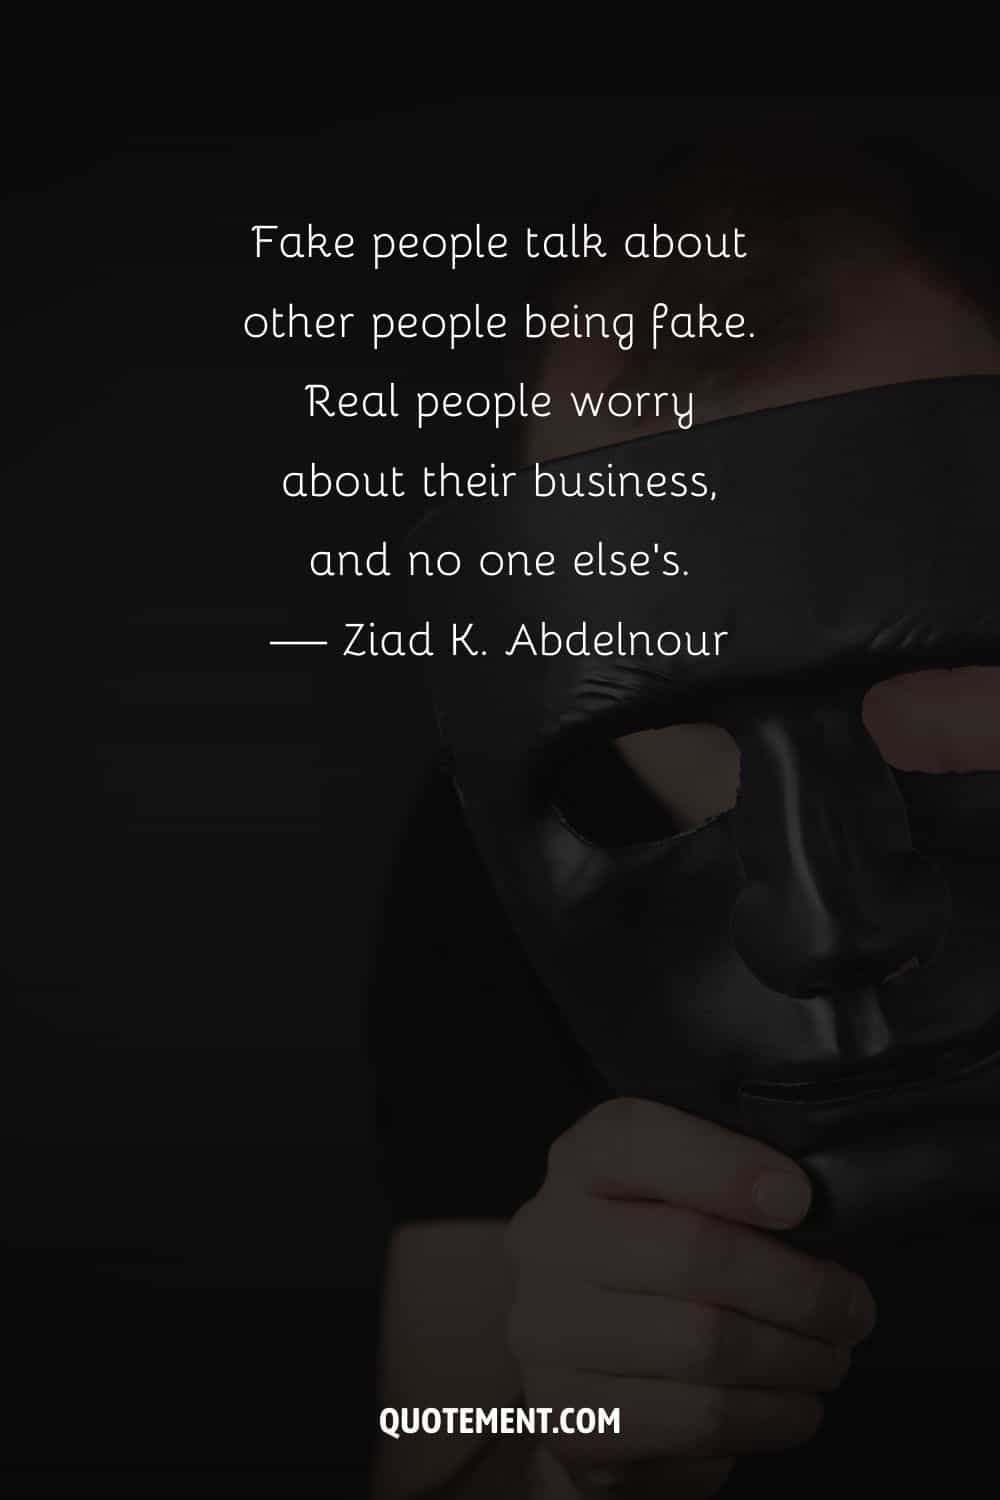 black mask image representing the greatest fake people quote